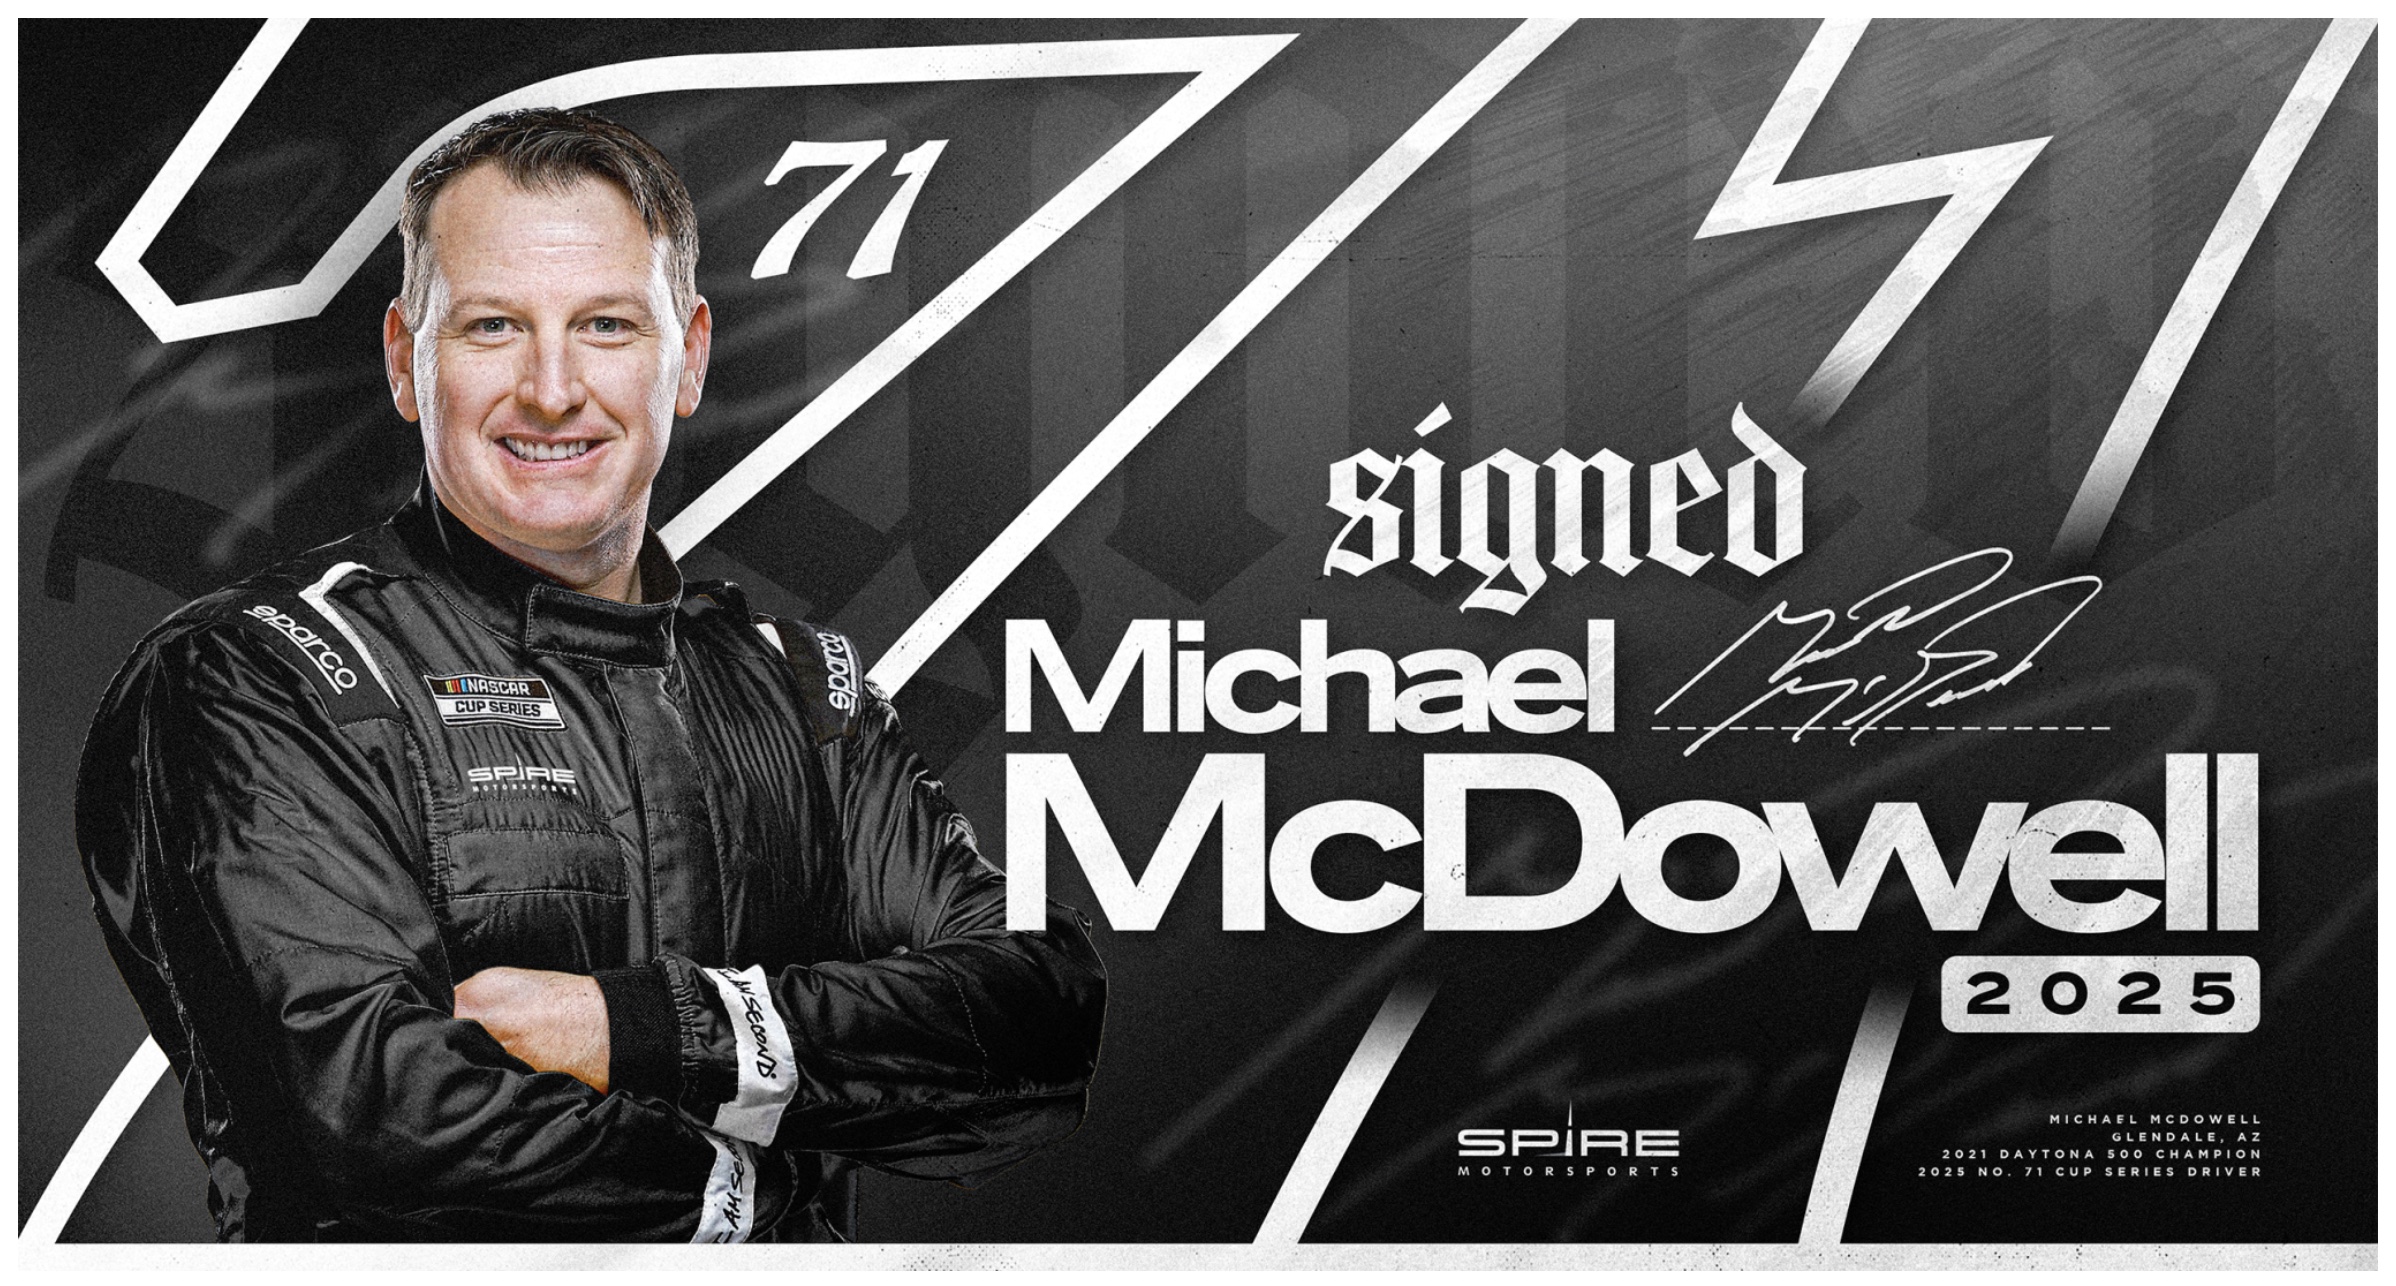 Michael McDowell to Drive Spire Motorsports No. 71 in 2025